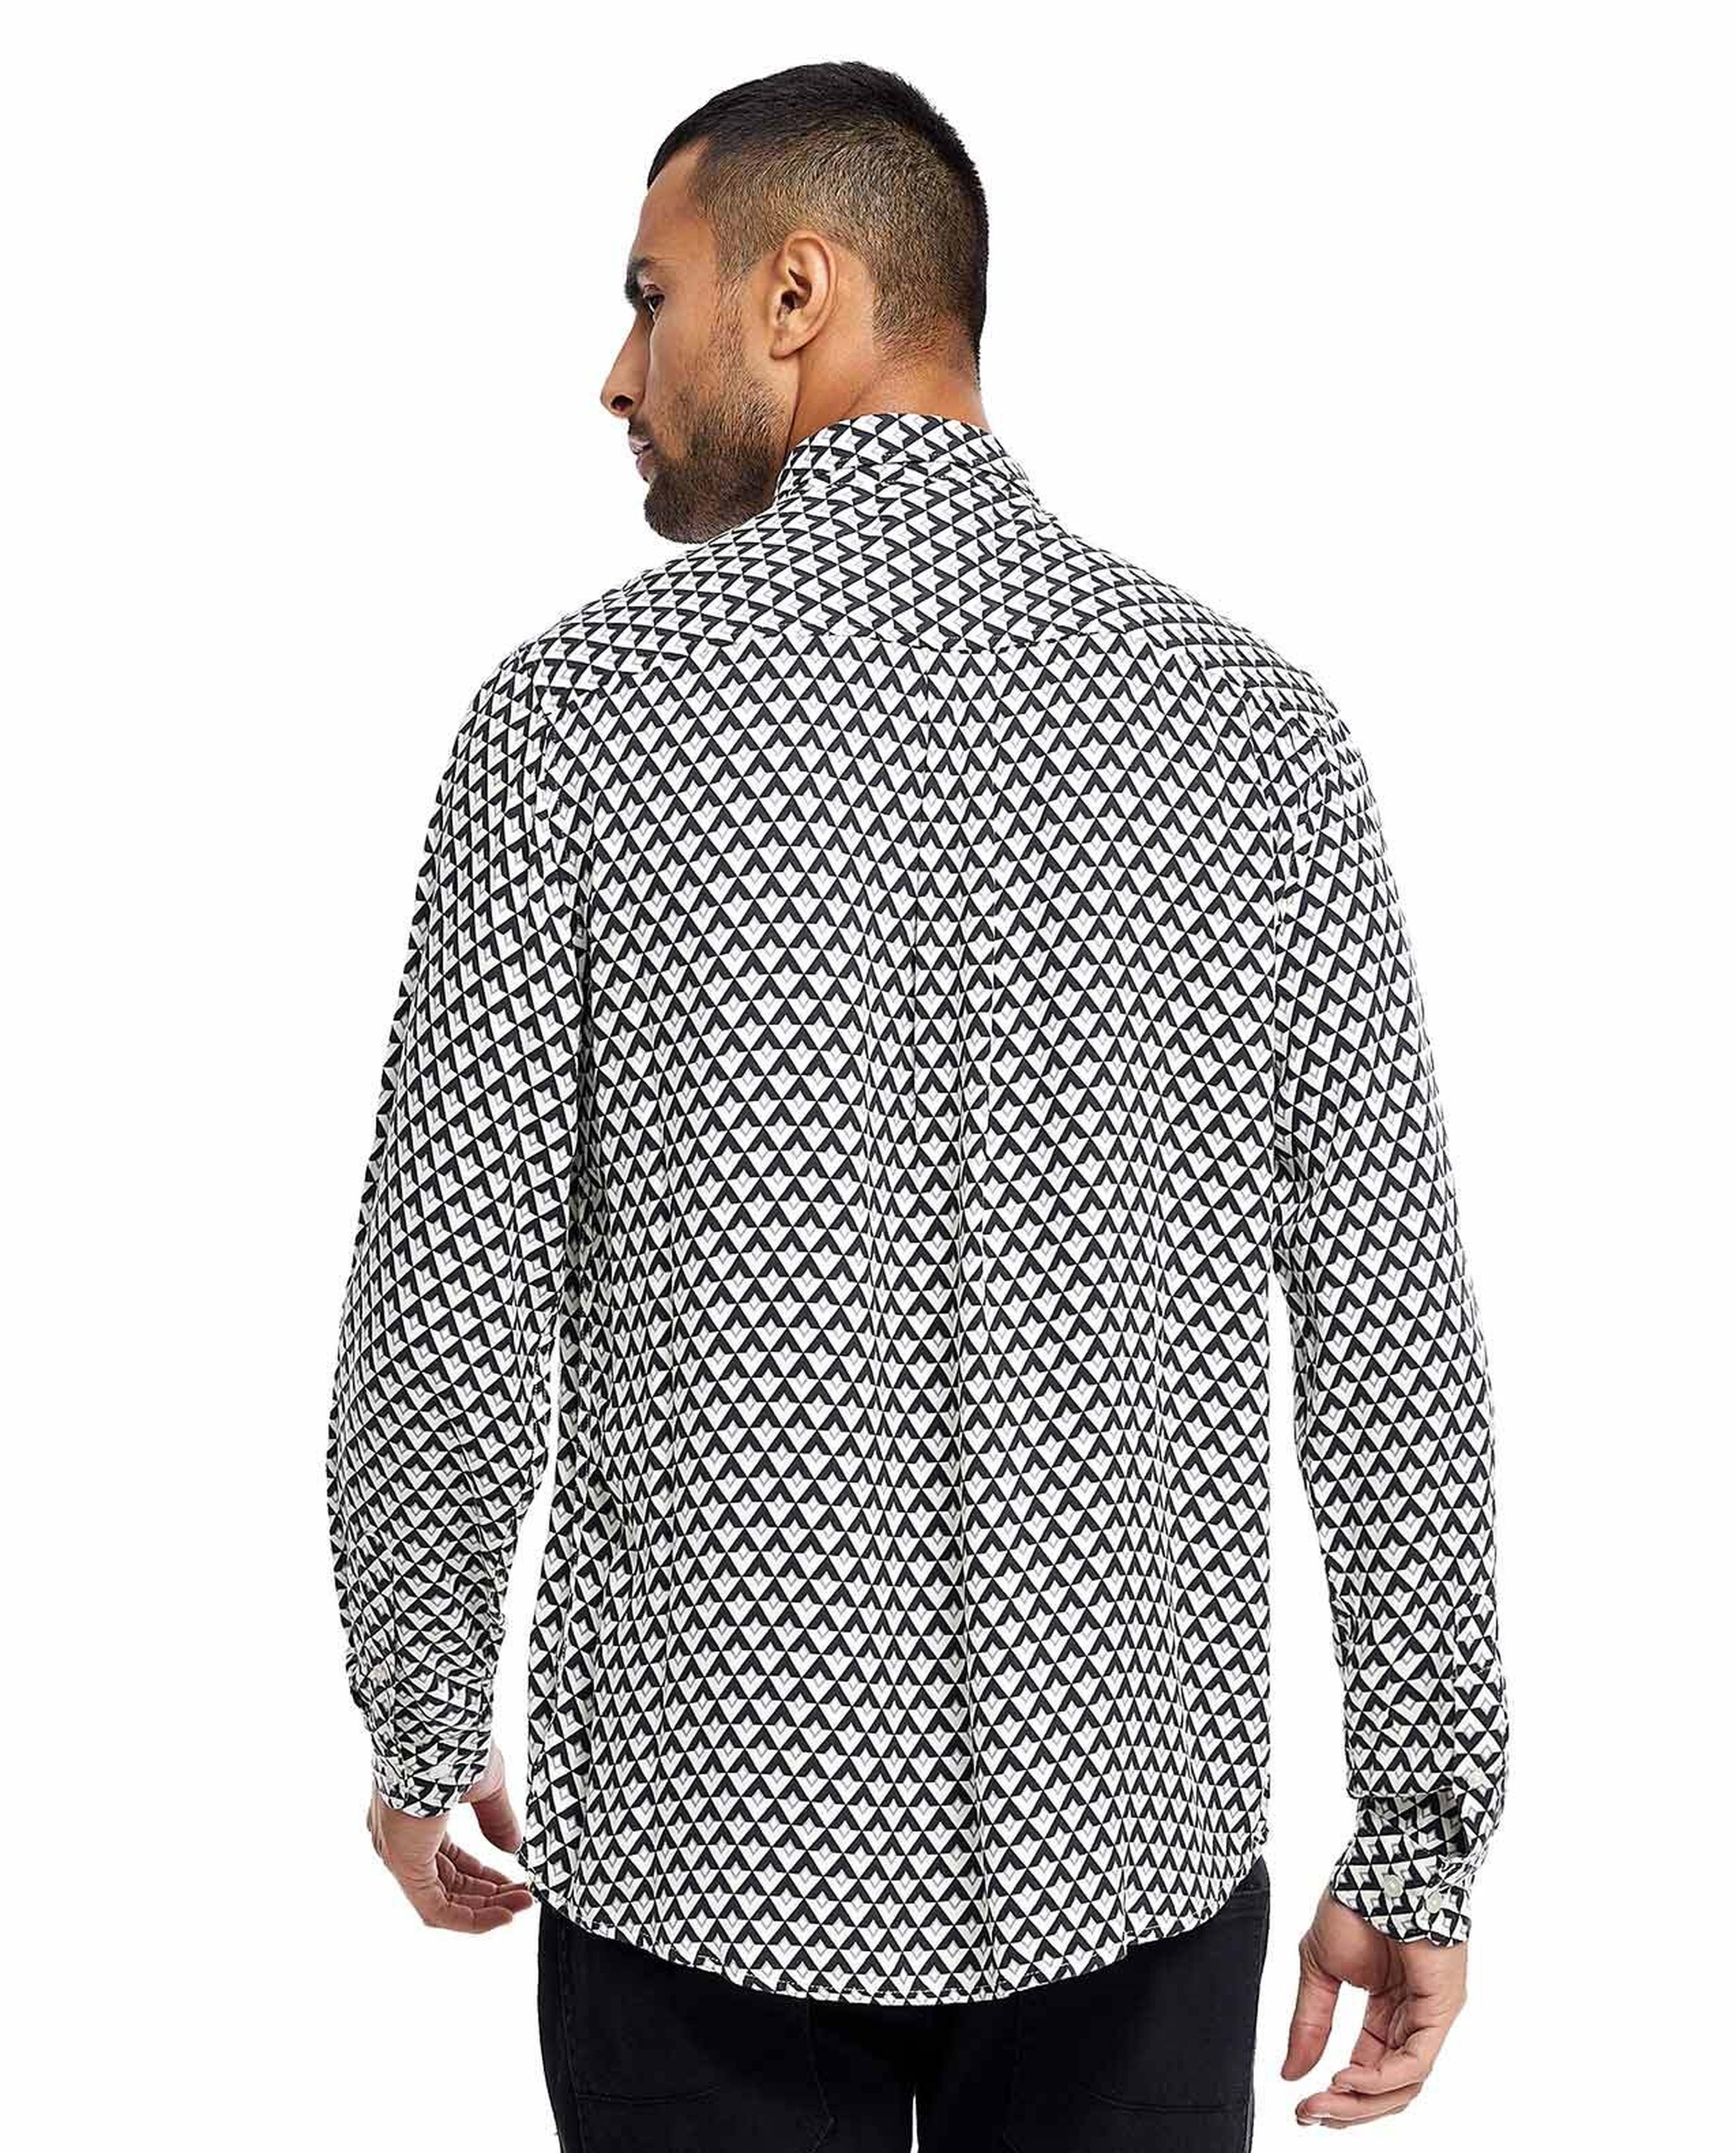 Patterned Shirt with Spread Collar and Long Sleeves